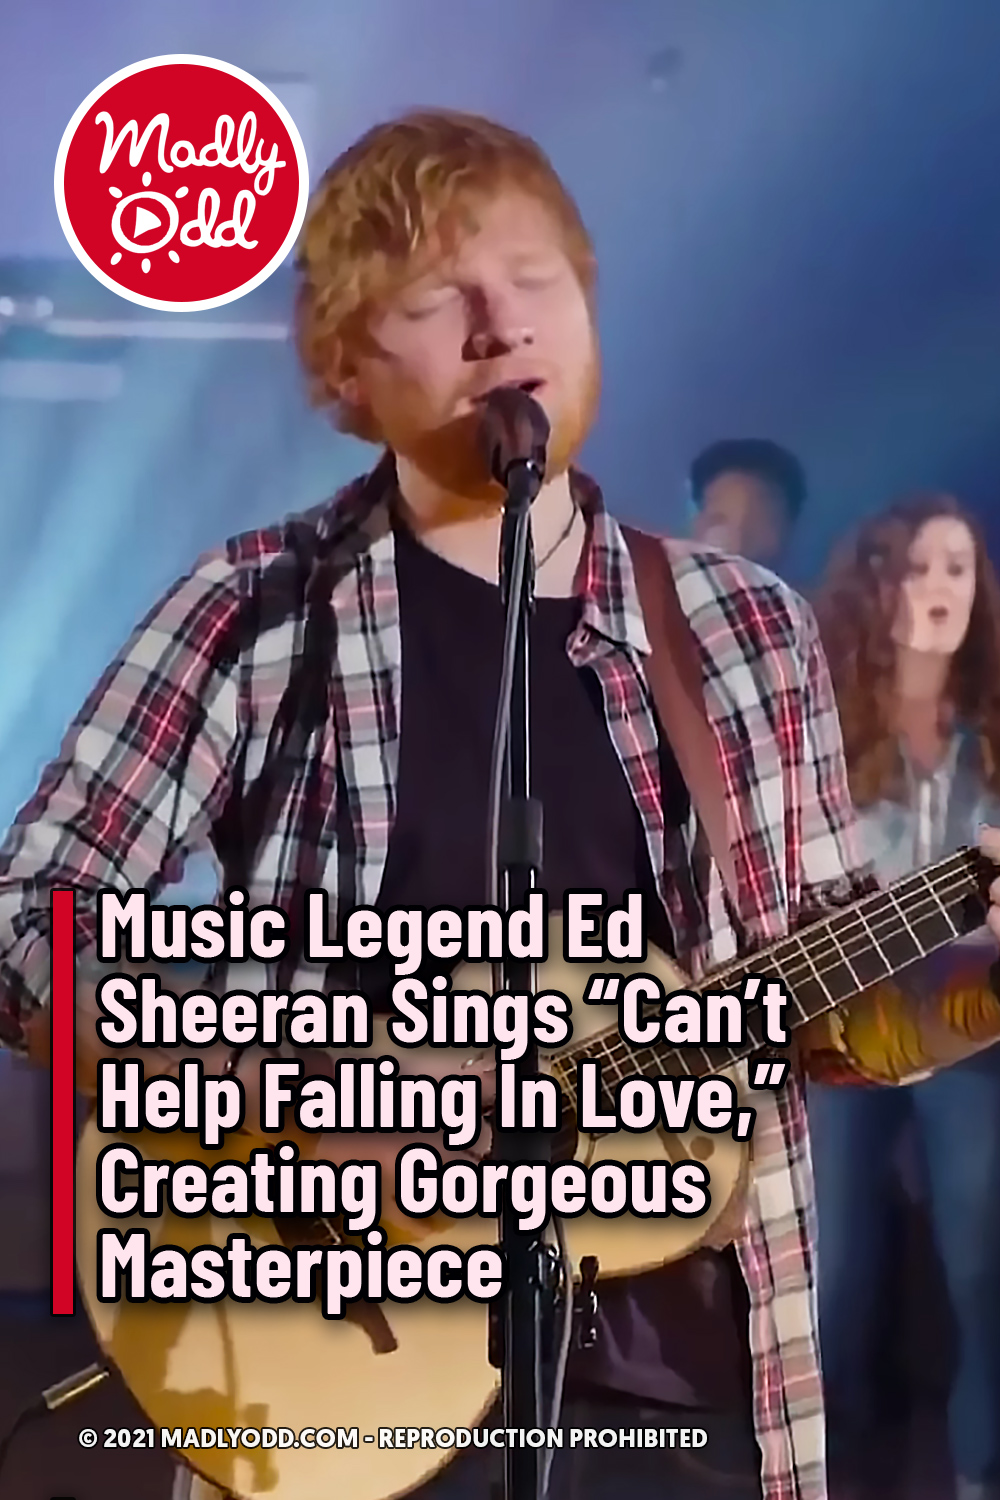 Music Legend Ed Sheeran Sings “Can’t Help Falling In Love,” Creating Gorgeous Masterpiece